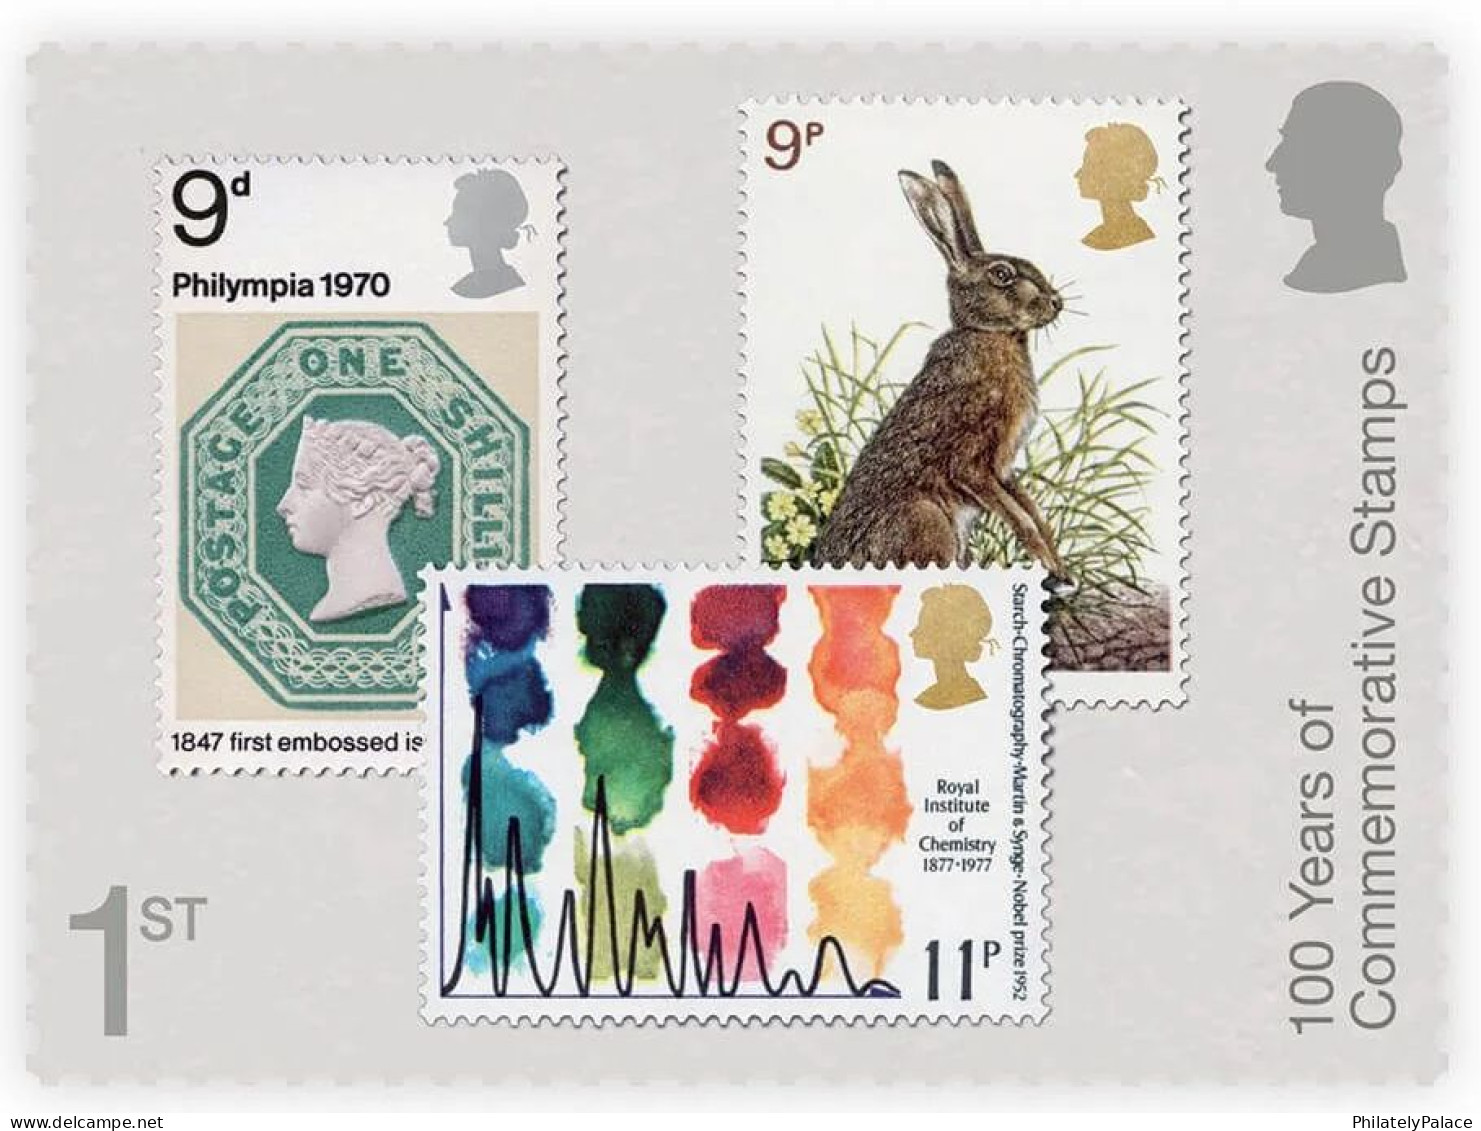 Great Britain (UK) New 2024 ,Stamp on Stamp, Lion,Queen,Butterfly,Flower,Music,Presentation Pack, Set of 10, MNH (**)